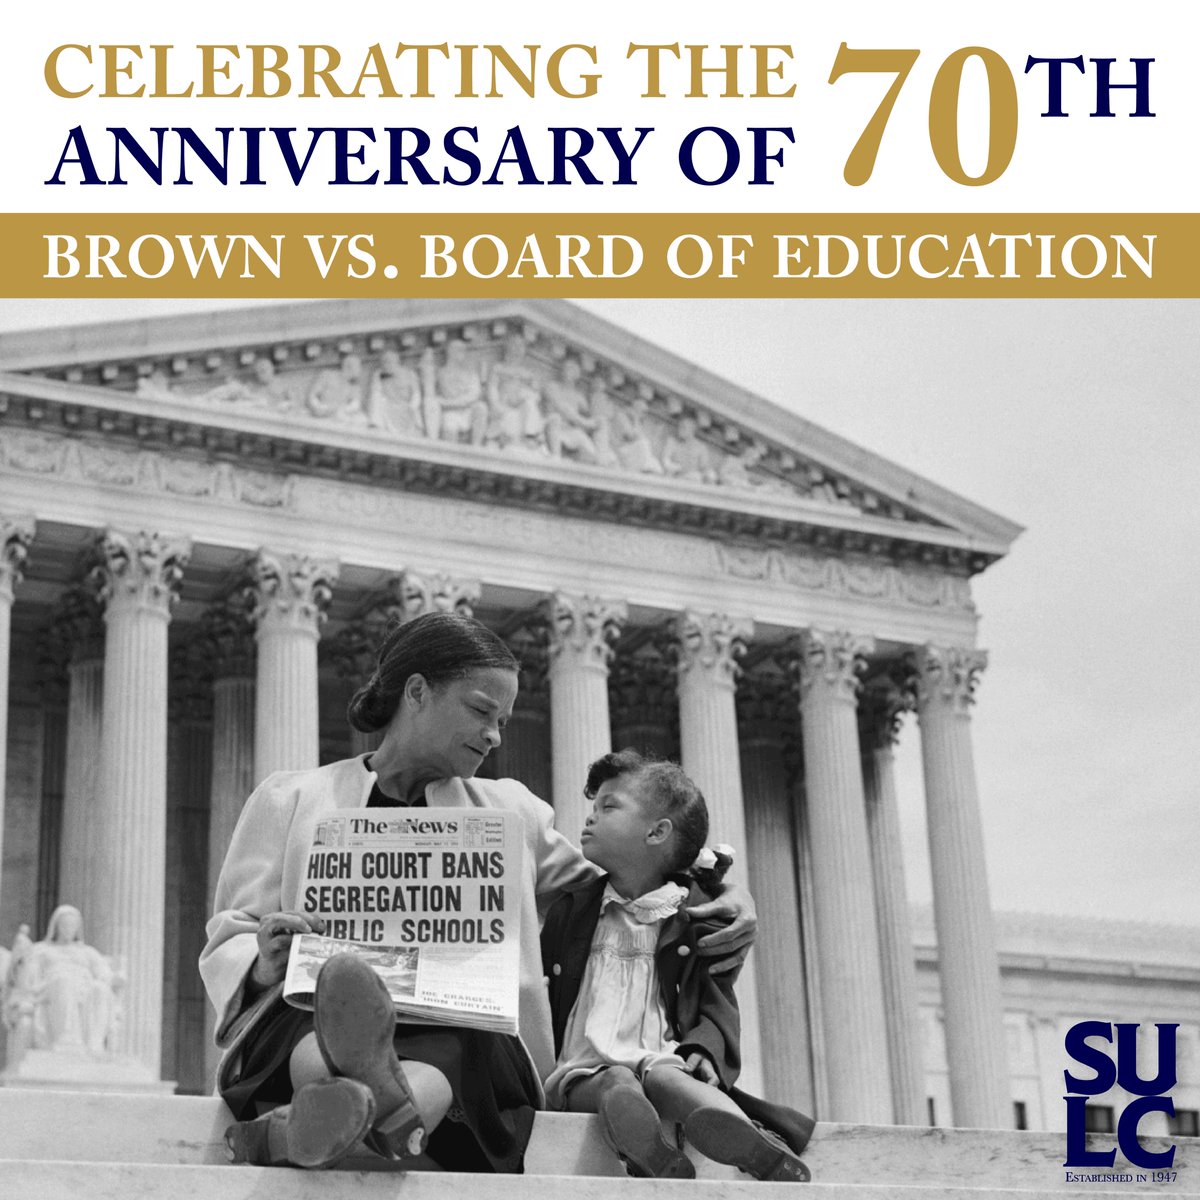 Today, we celebrate history. Seventy years ago the U.S. Supreme Court ruling in Brown v. Board of Education changed the trajectory of public education and sparked the end of segregated schools. #SULC #BrownvsBoard